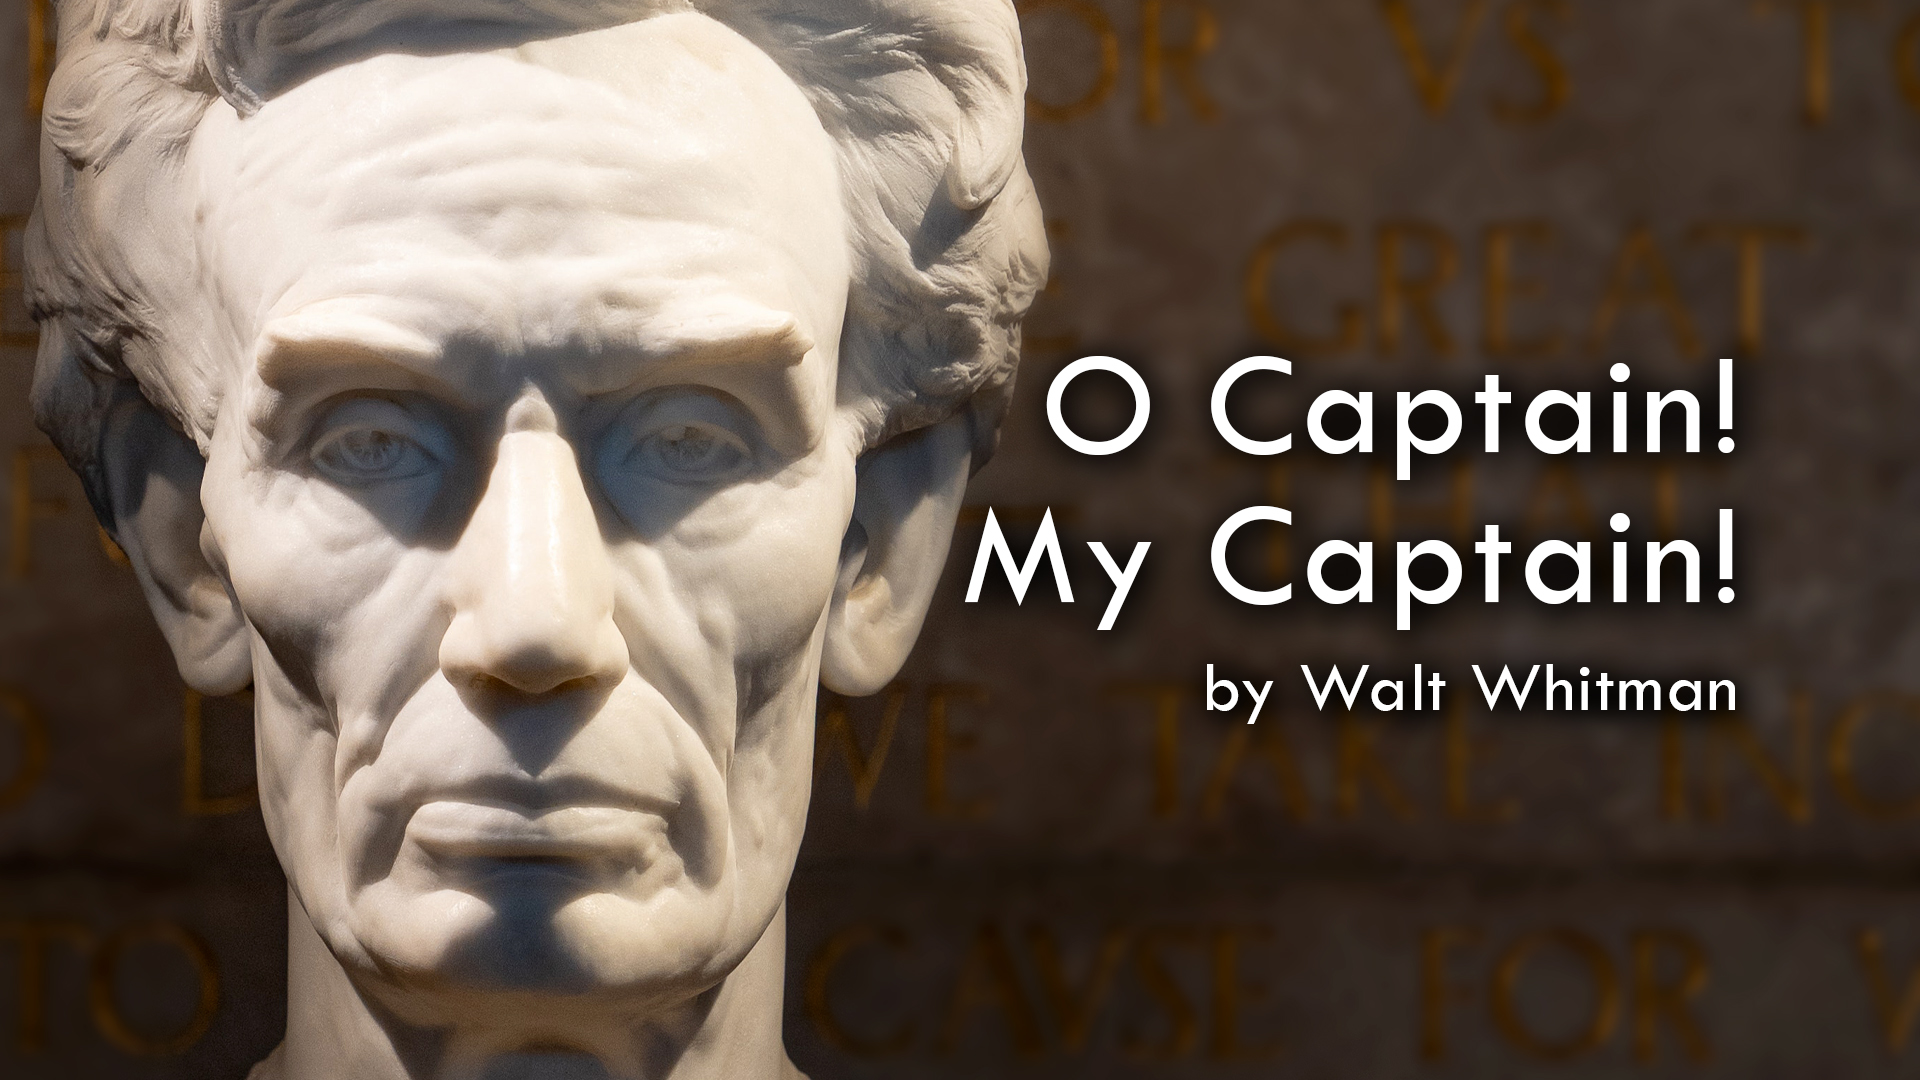 O Captain! My Captain! by Walt Whitman, read by Zack Lawrence